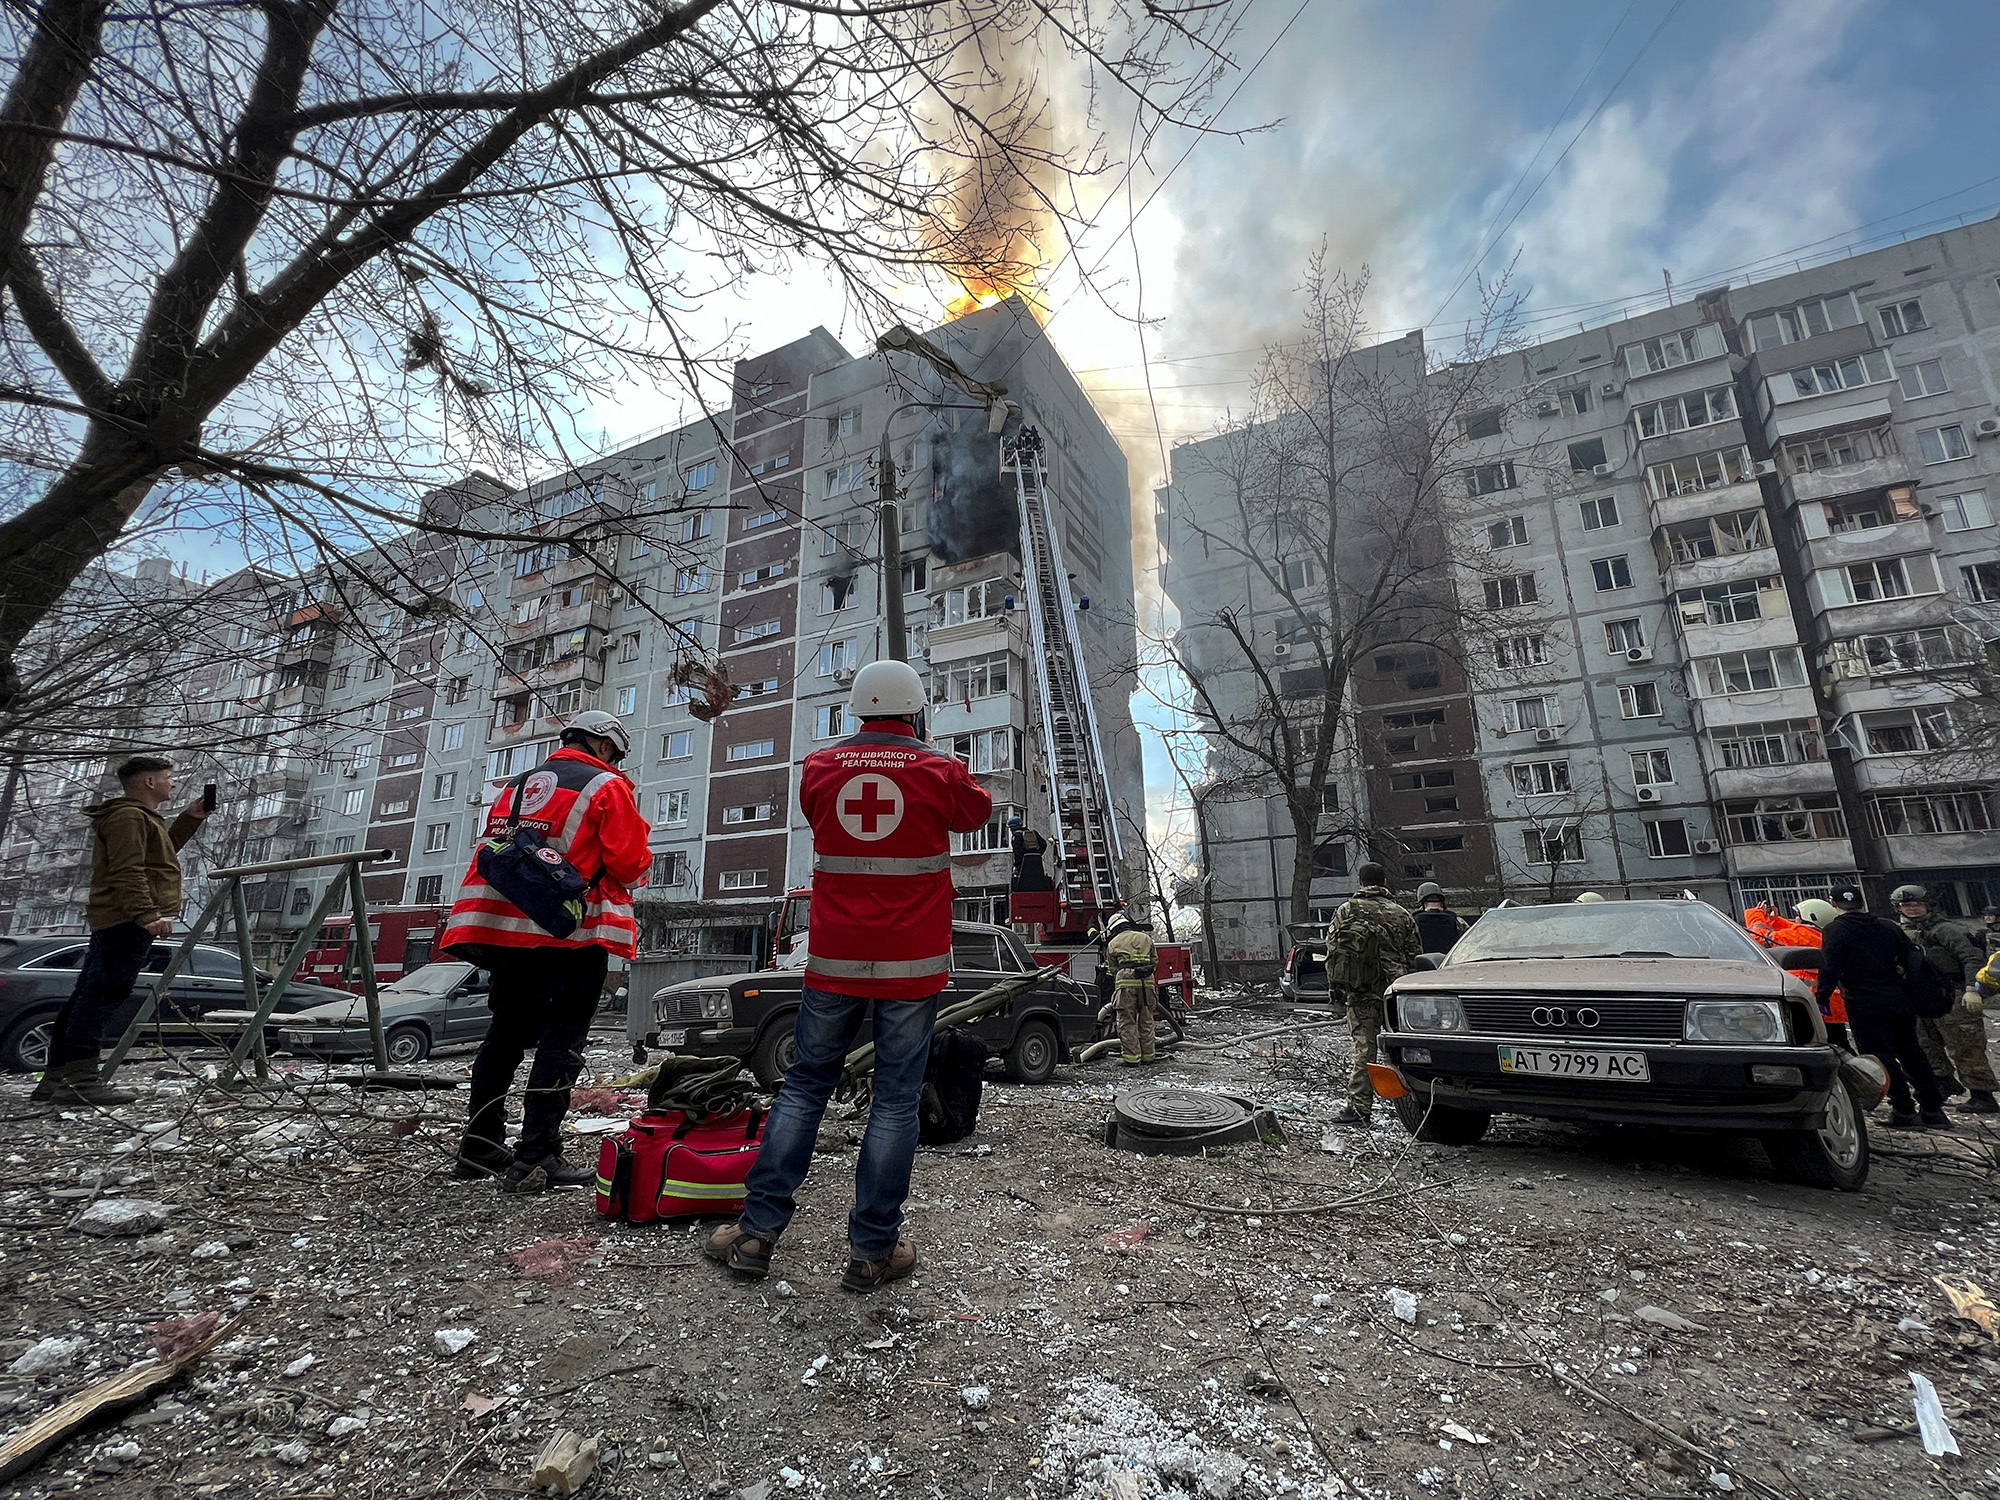 Paramedics and rescuers work at a site of a residential building damaged by a Russian missile strike in Zaporizhzhia, Ukraine, on March 22.